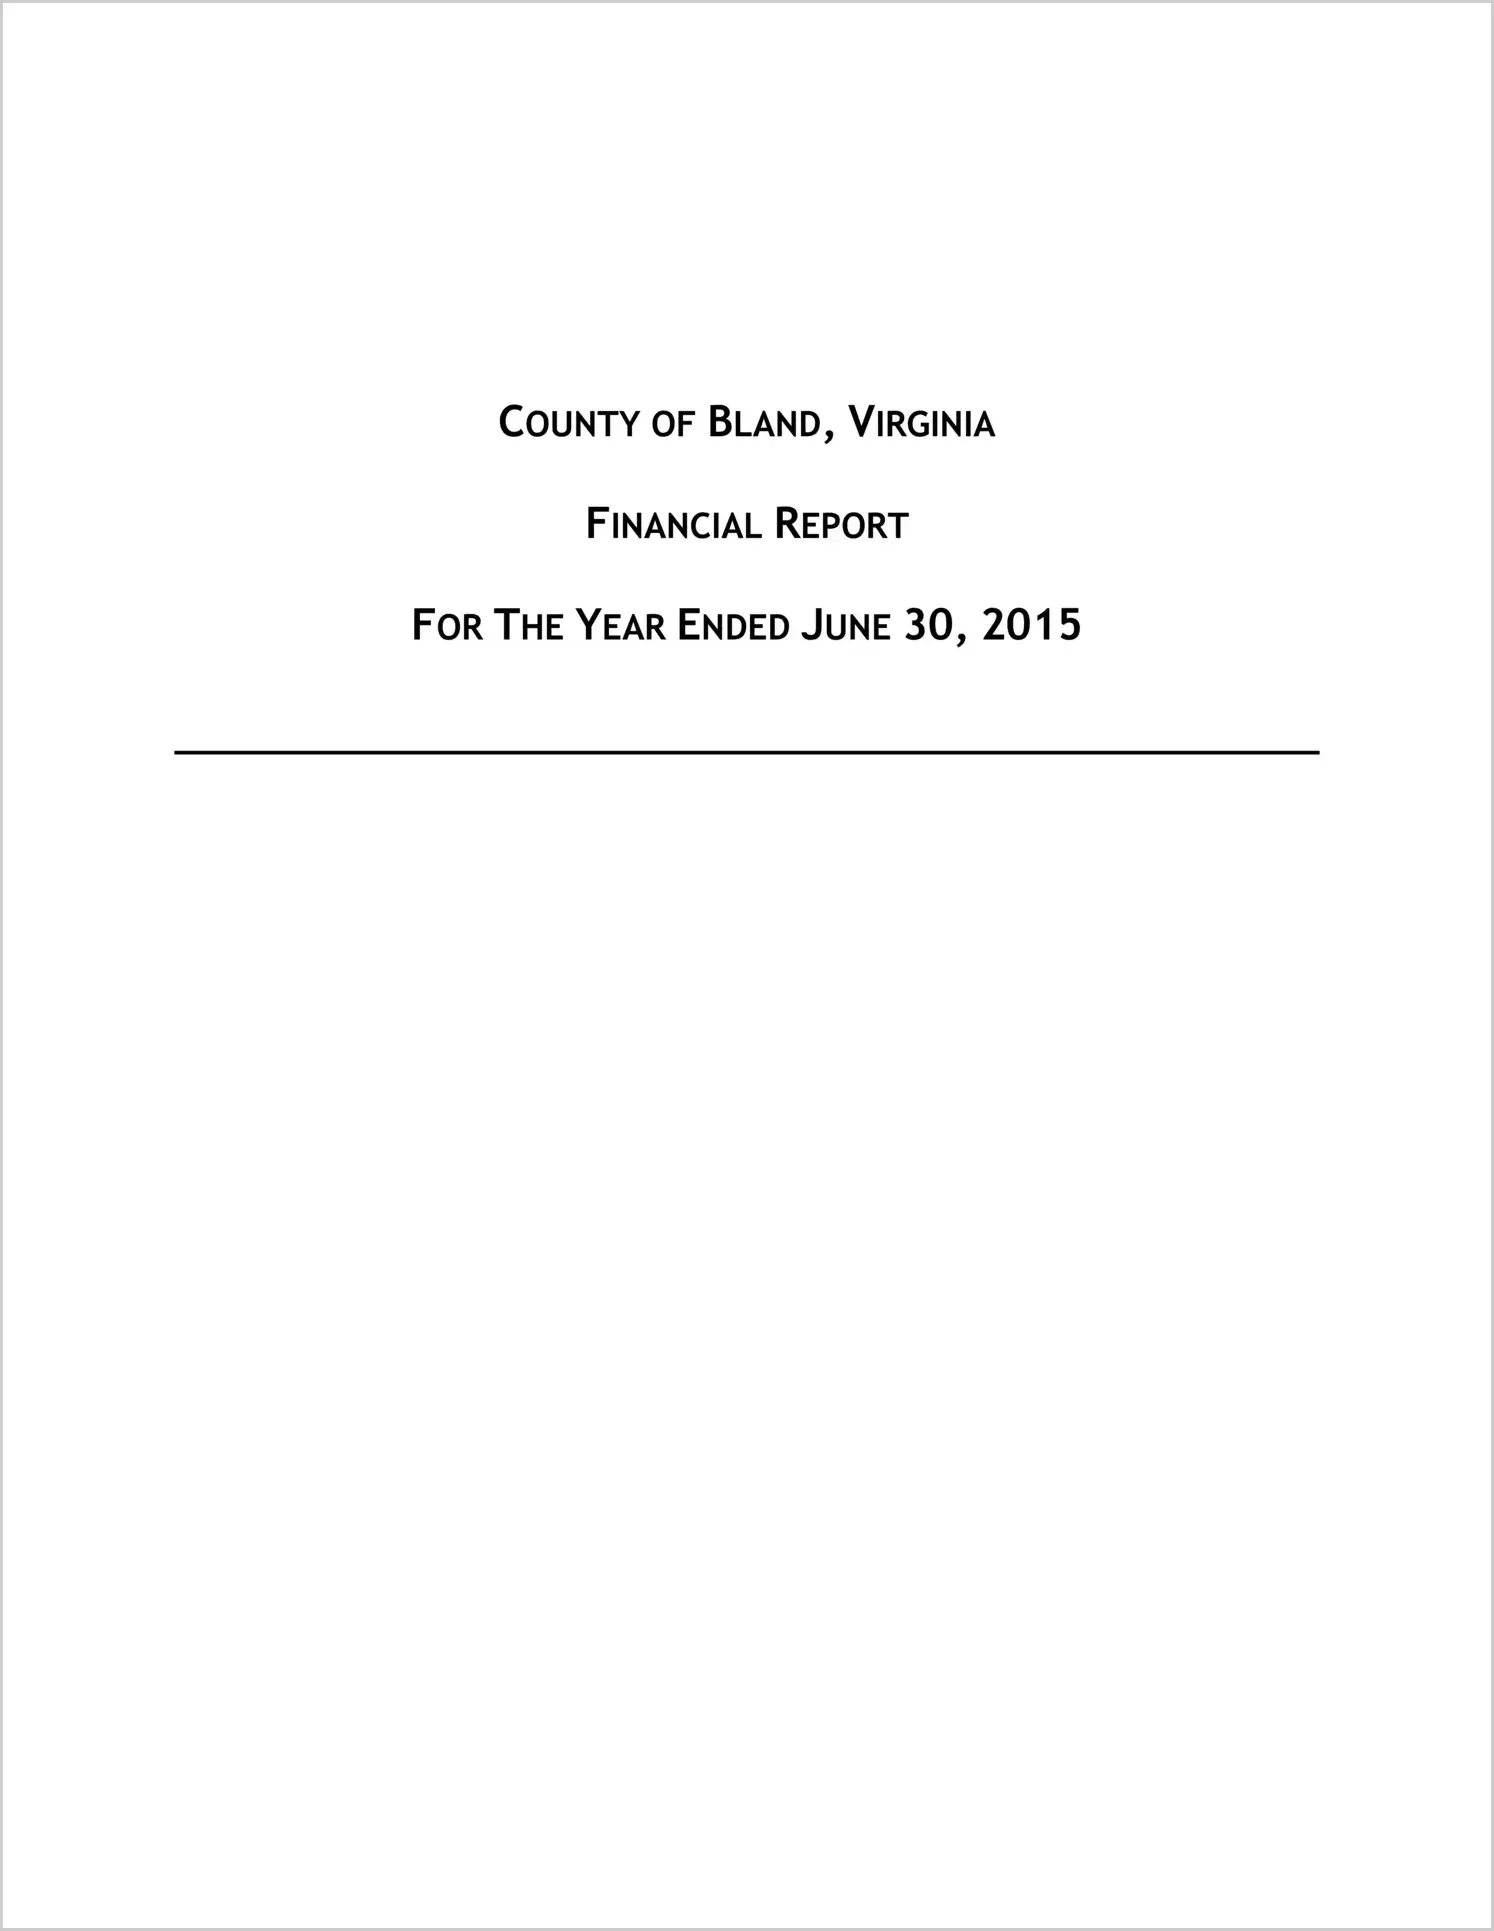 2015 Annual Financial Report for County of Bland